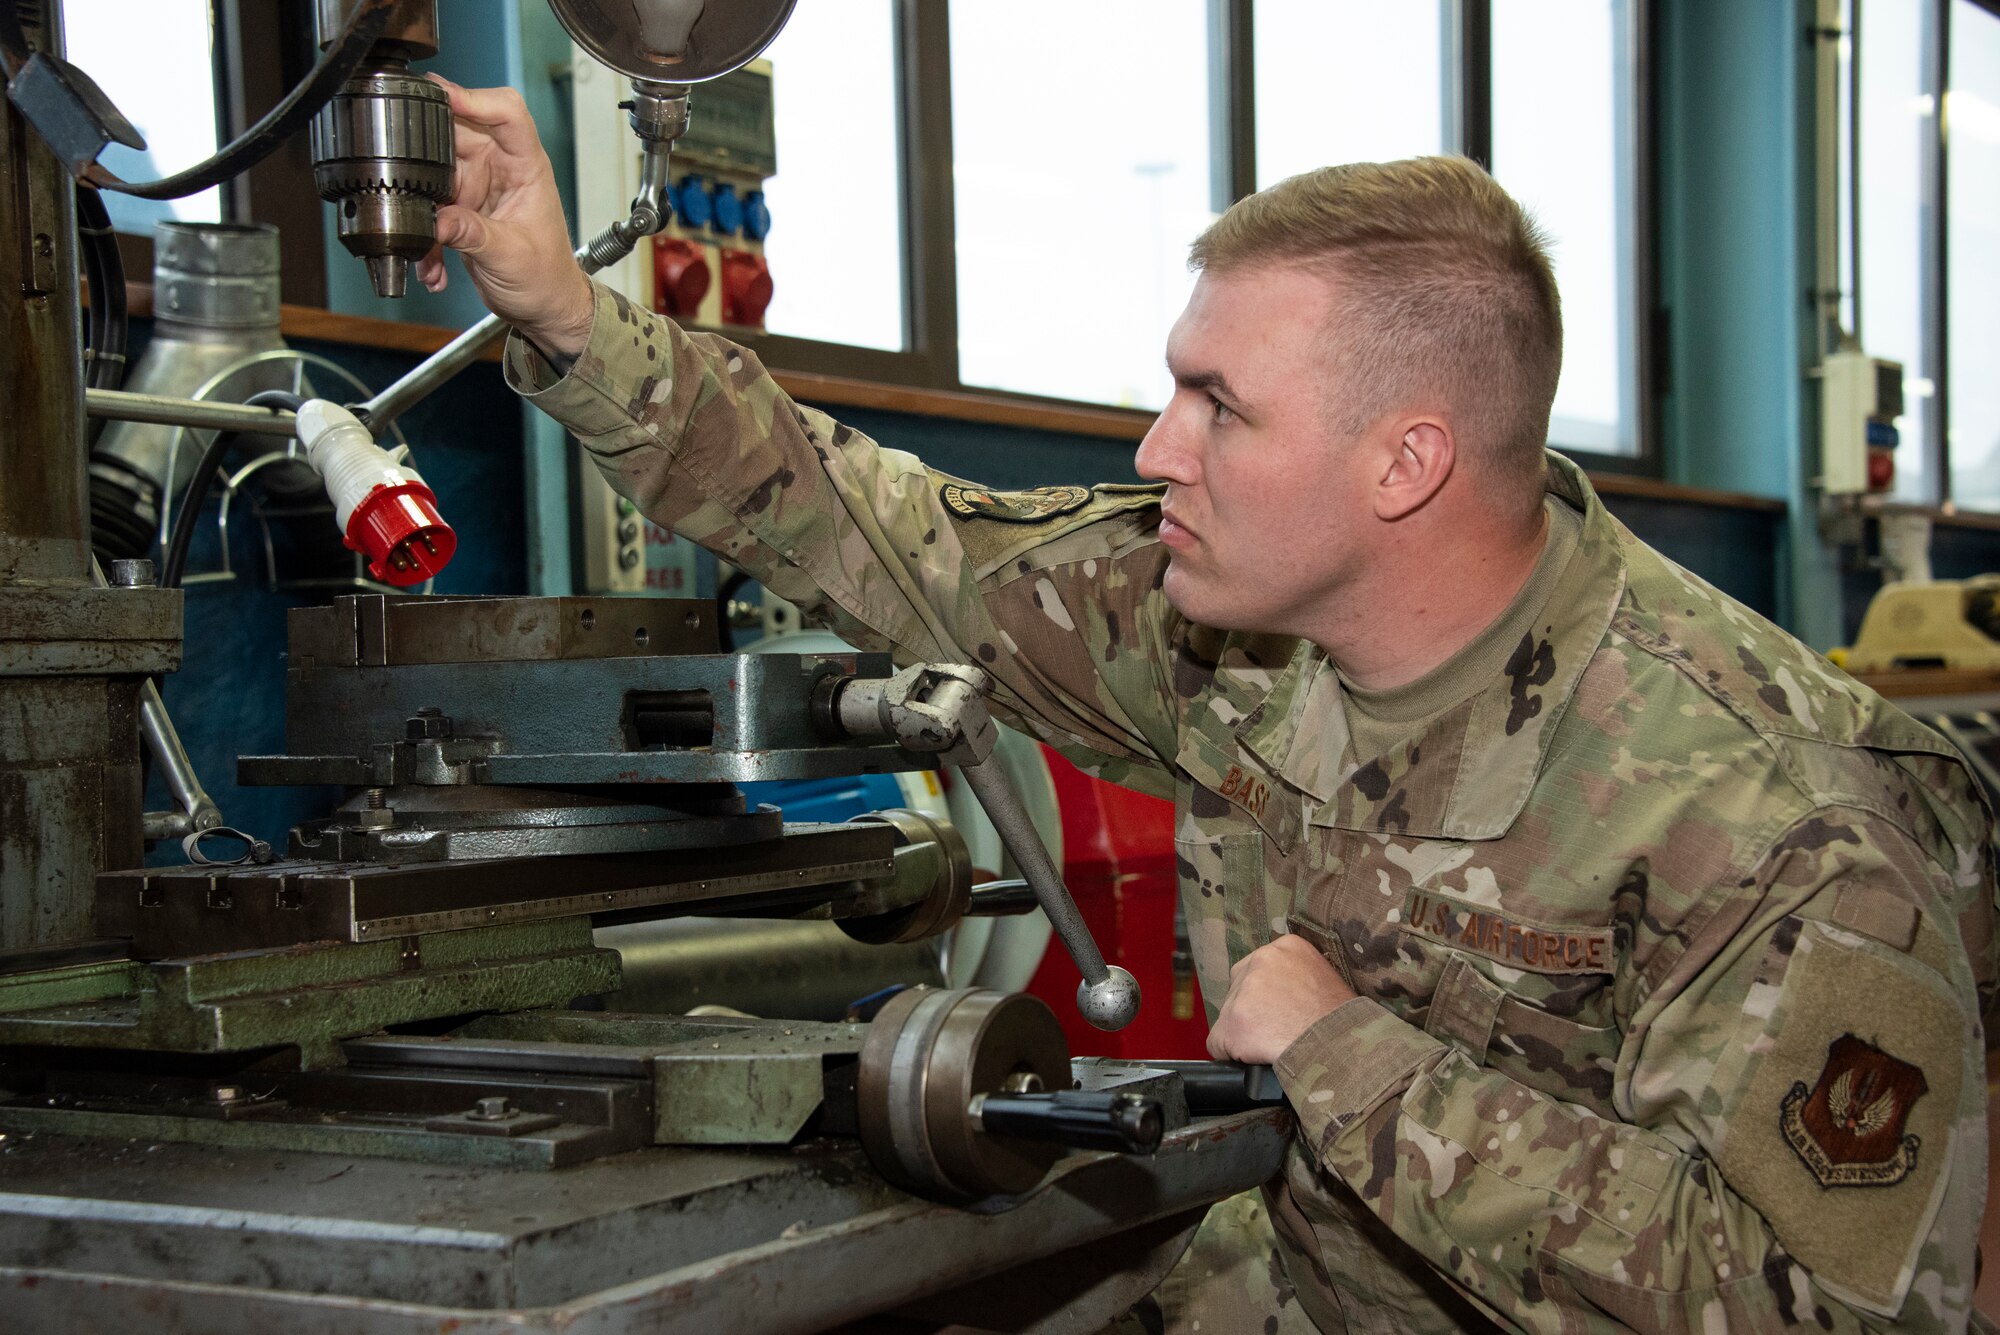 U.S. Air Force Staff Sgt. Jacob Bass, 52nd Fighter Wing Safety Office occupational safety technician, inspects a drill press that has been removed from service due to a lack of machine safety guards on Spangdahlem Air Base, Germany, Oct. 27, 2021. The occupational safety profession inspects base facilities and equipment and provides education and training to ensure work centers are safe. (U.S. Air Force photo by Staff Sgt. Chance Nardone)